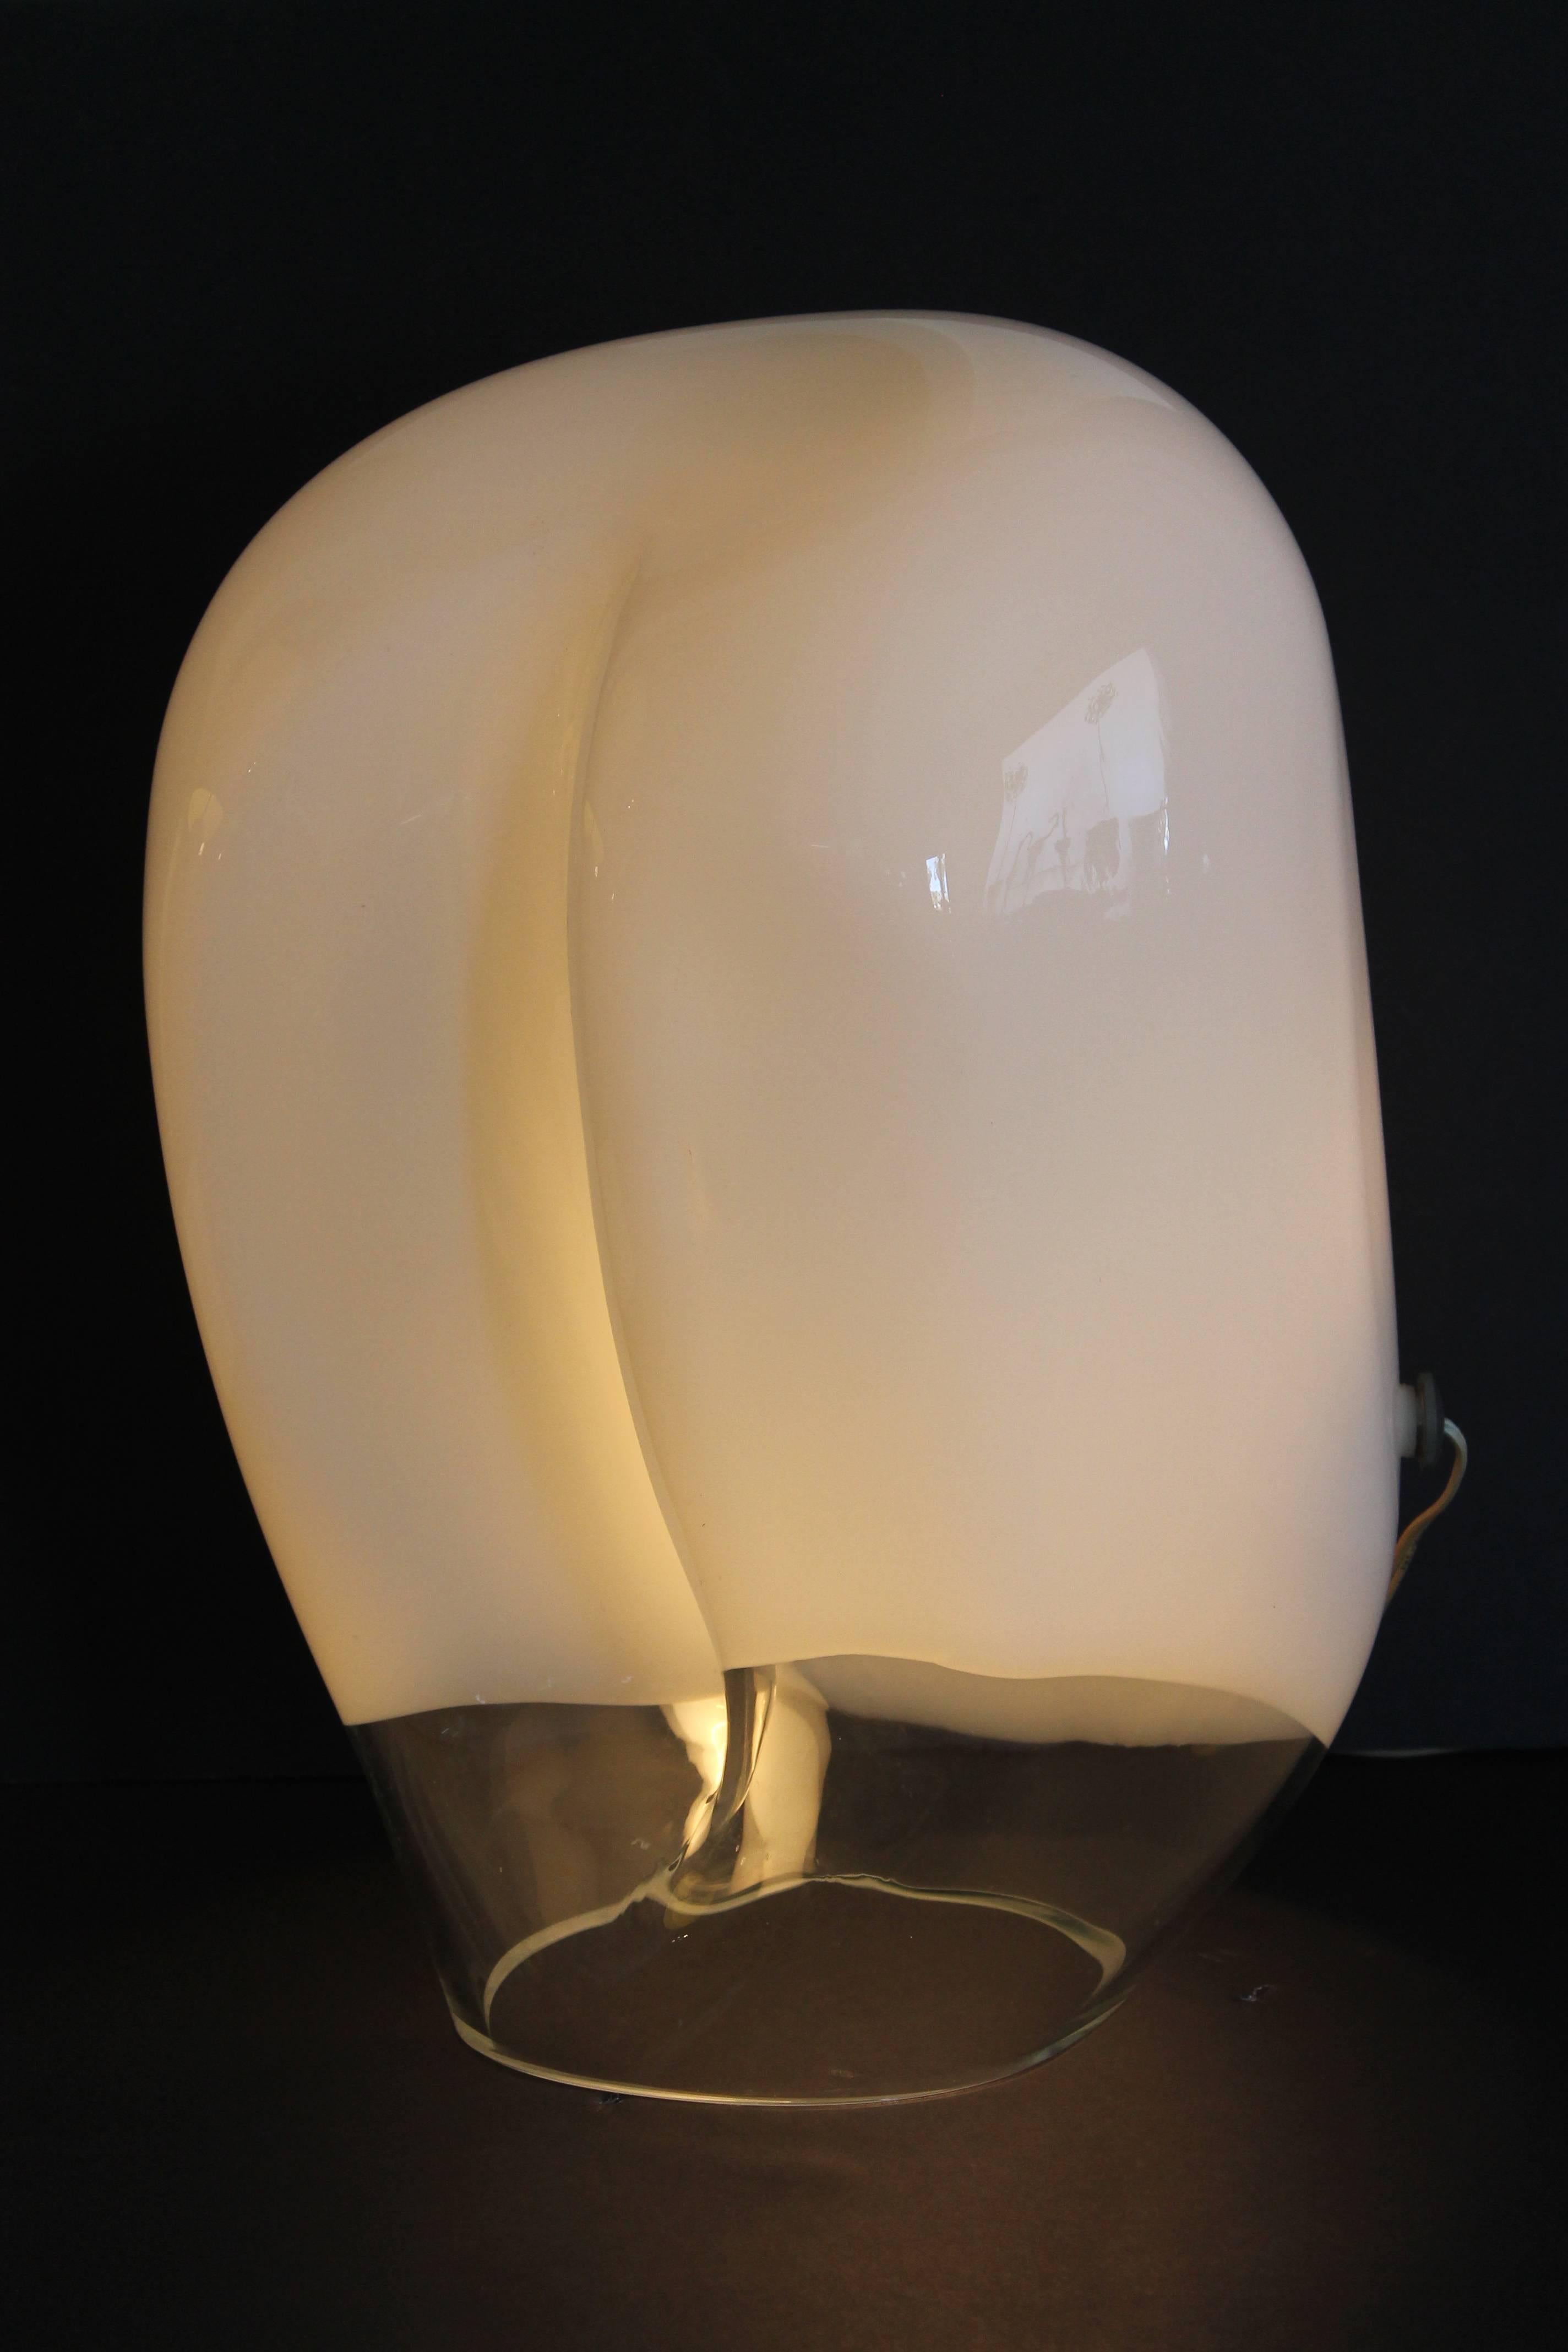 A dramatic and sculptural lamp by Luciano Vistosi, circa early 1970s. Lamp is large and impressive measuring 17